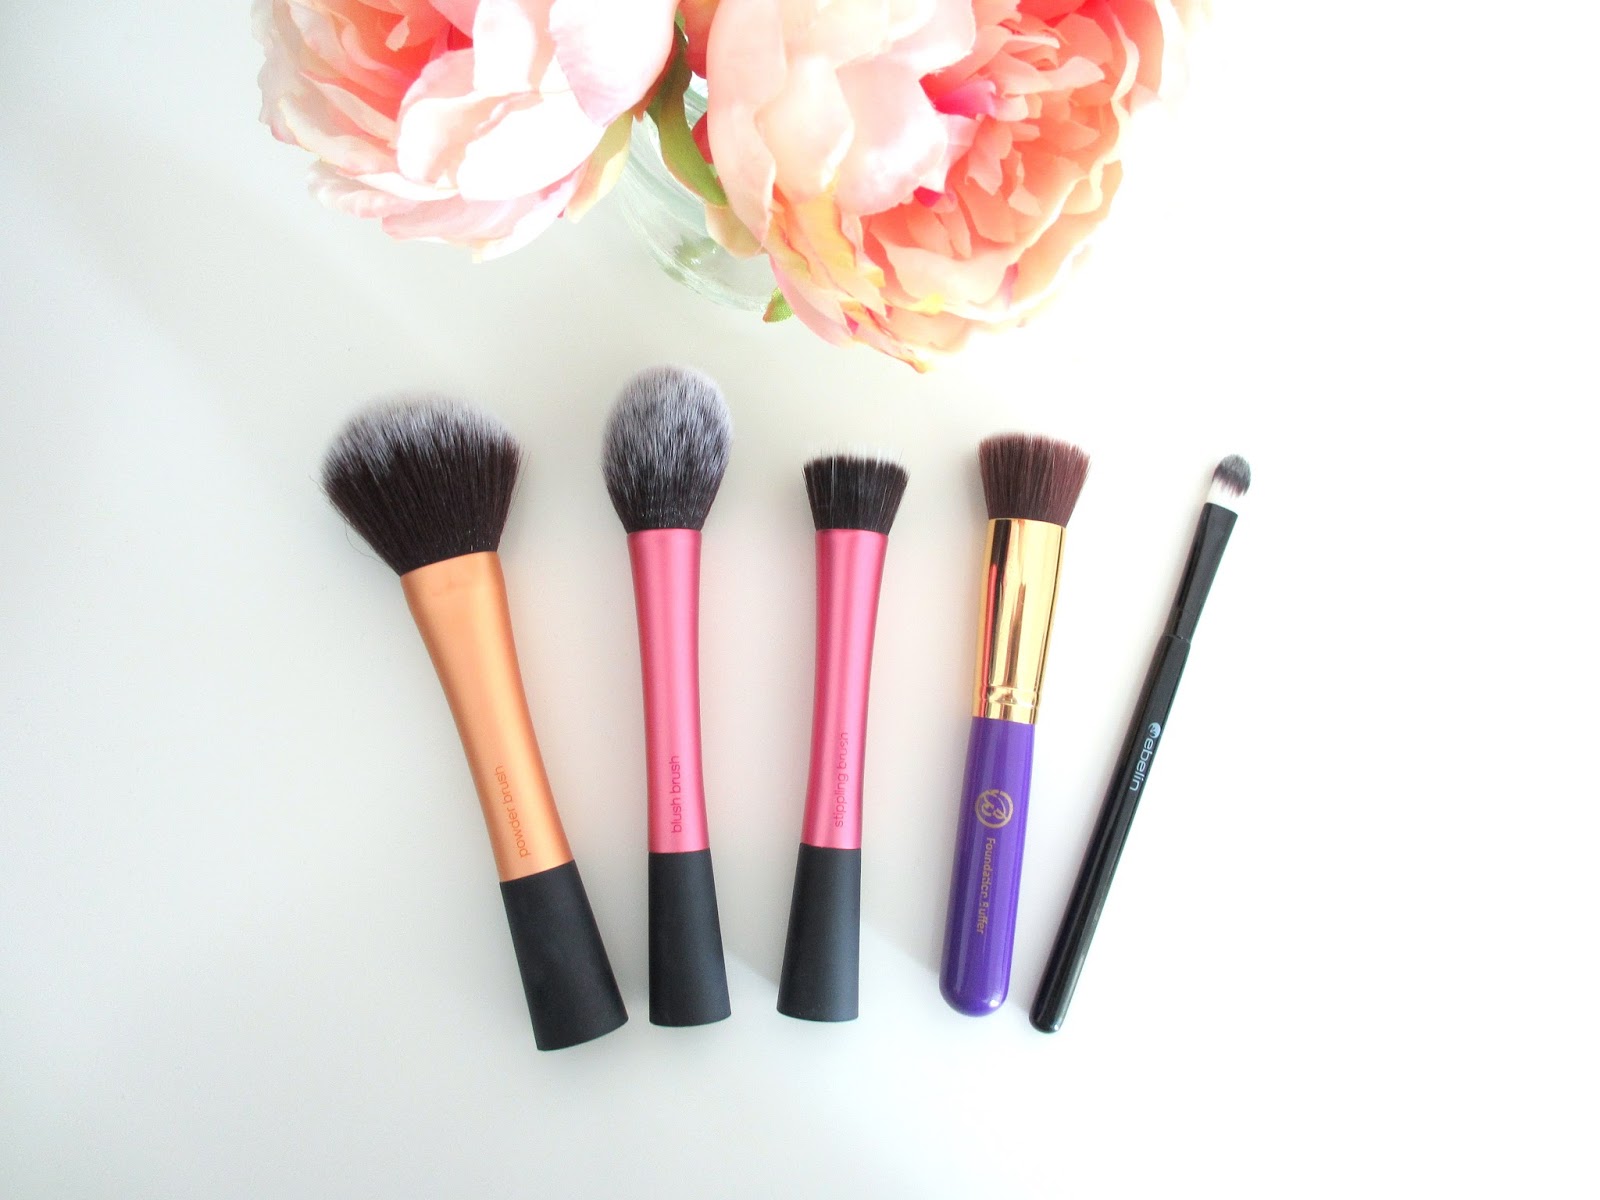 My Favourite Make Up Brushes